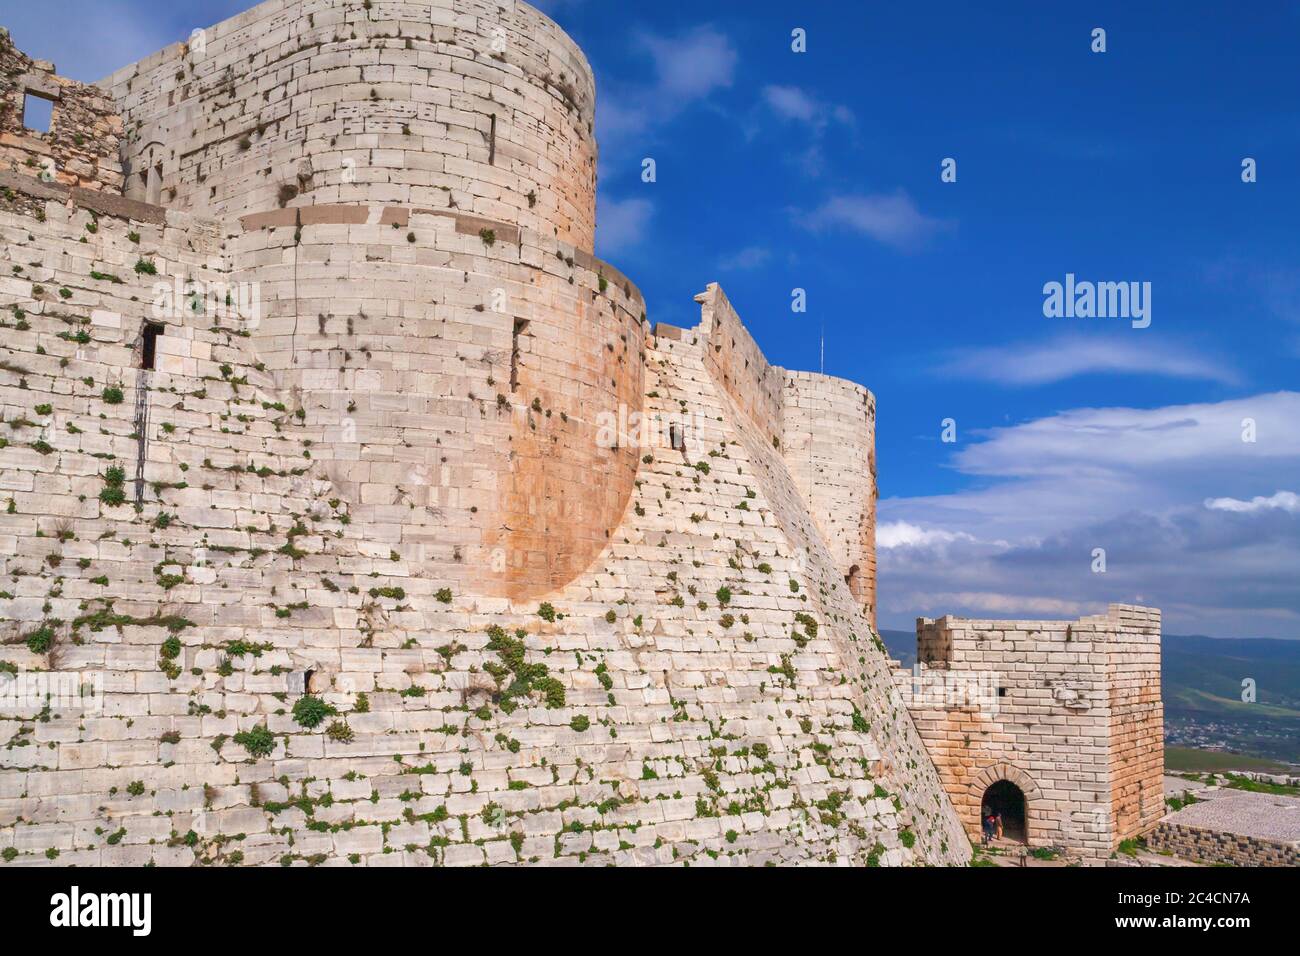 Crusaders castle Krak des Chevaliers, Castle of the Knights, Qalaat al Hosn, (1140-1260), Syria Stock Photo